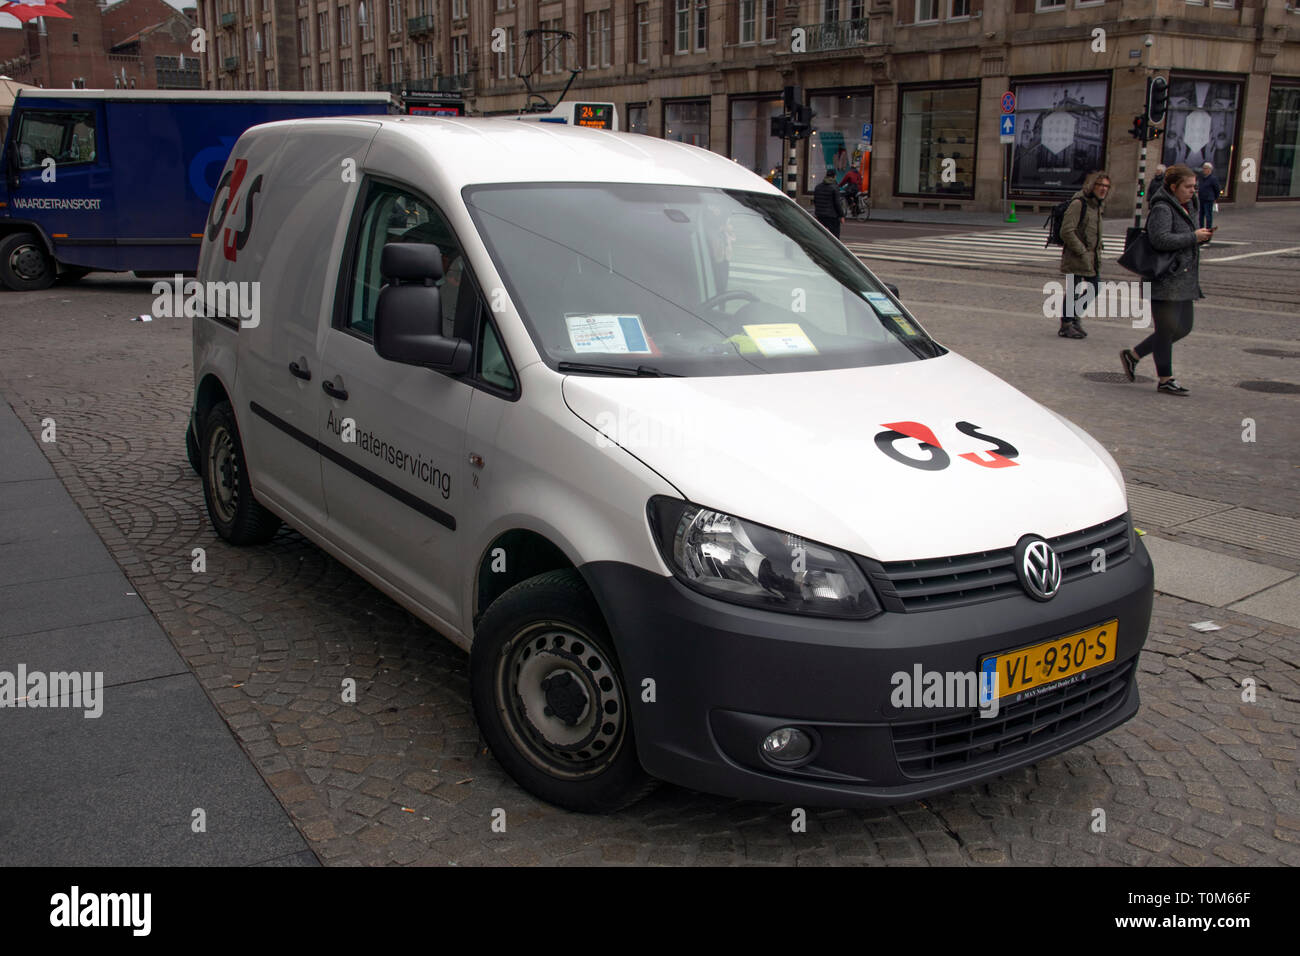 G4S Company Truck And Car At Amsterdam The Netherlands 2019 Stock Photo